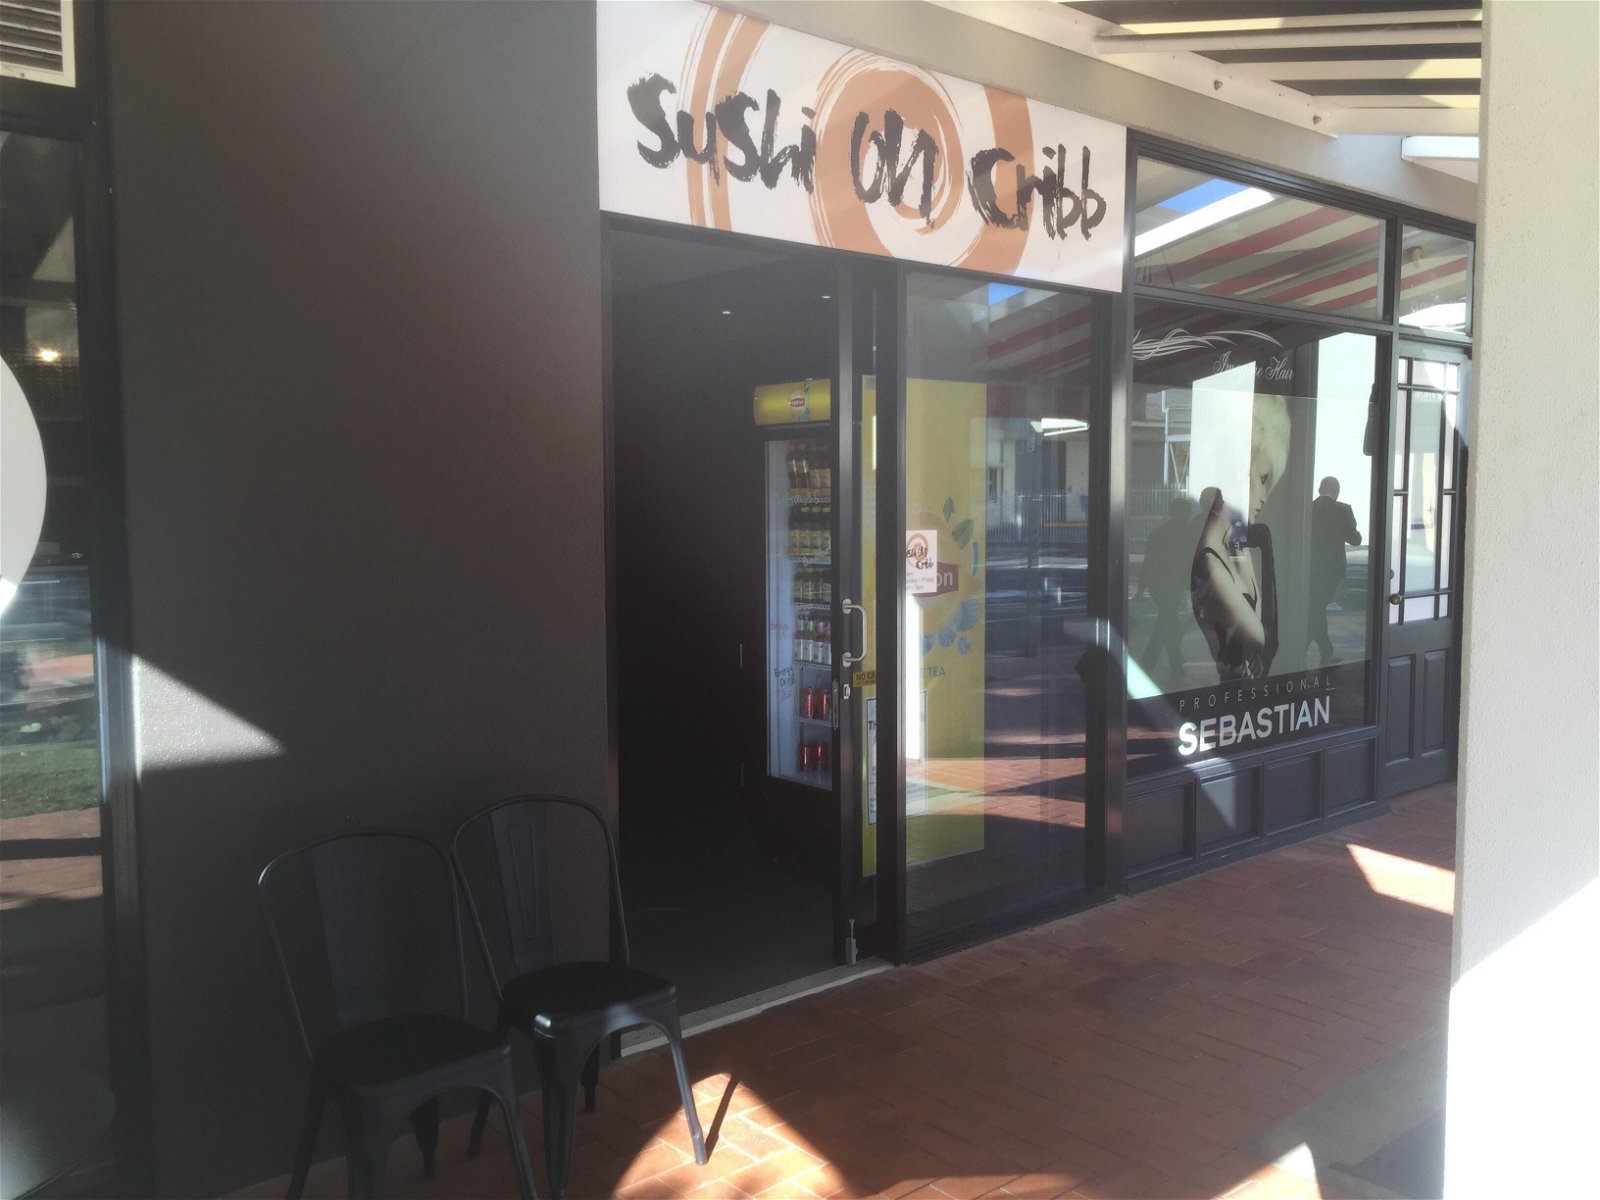 Sushi on Cribb - New South Wales Tourism 